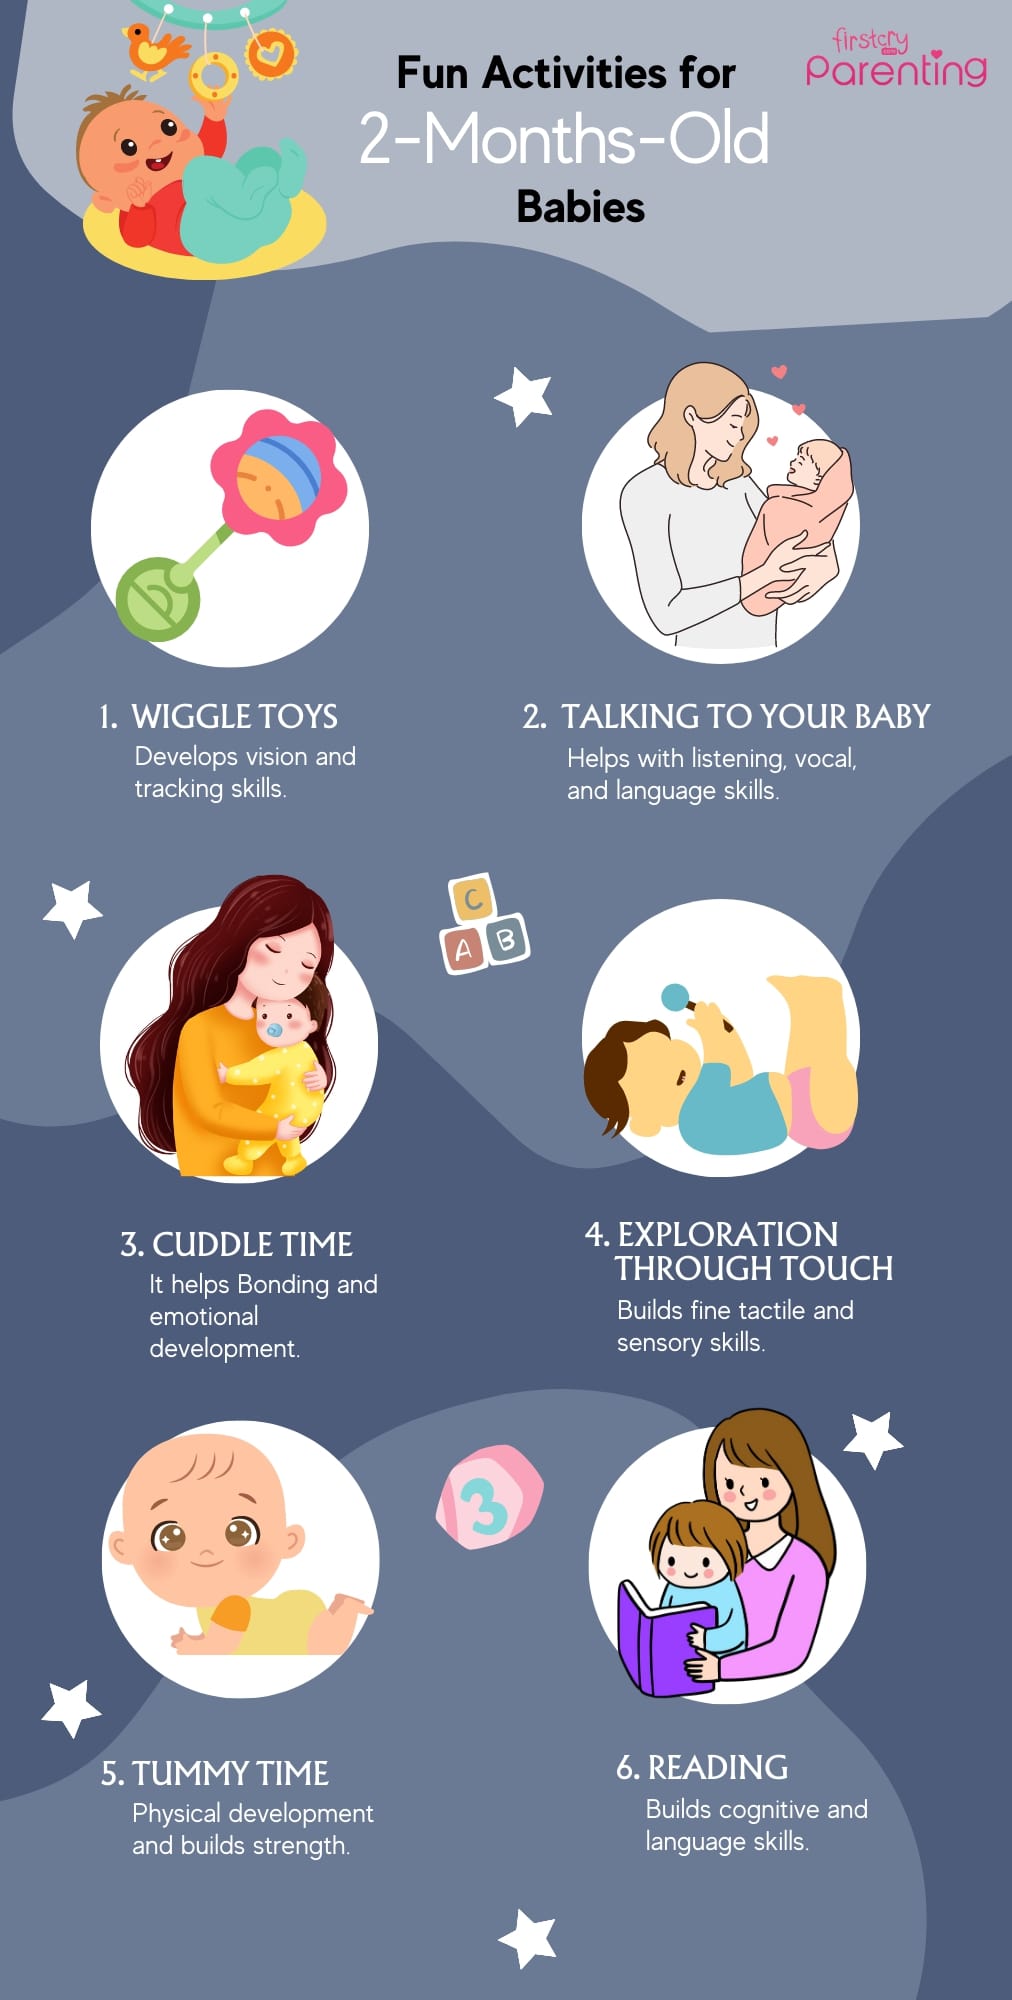 Fun Activities for 2-Month-Old Babies